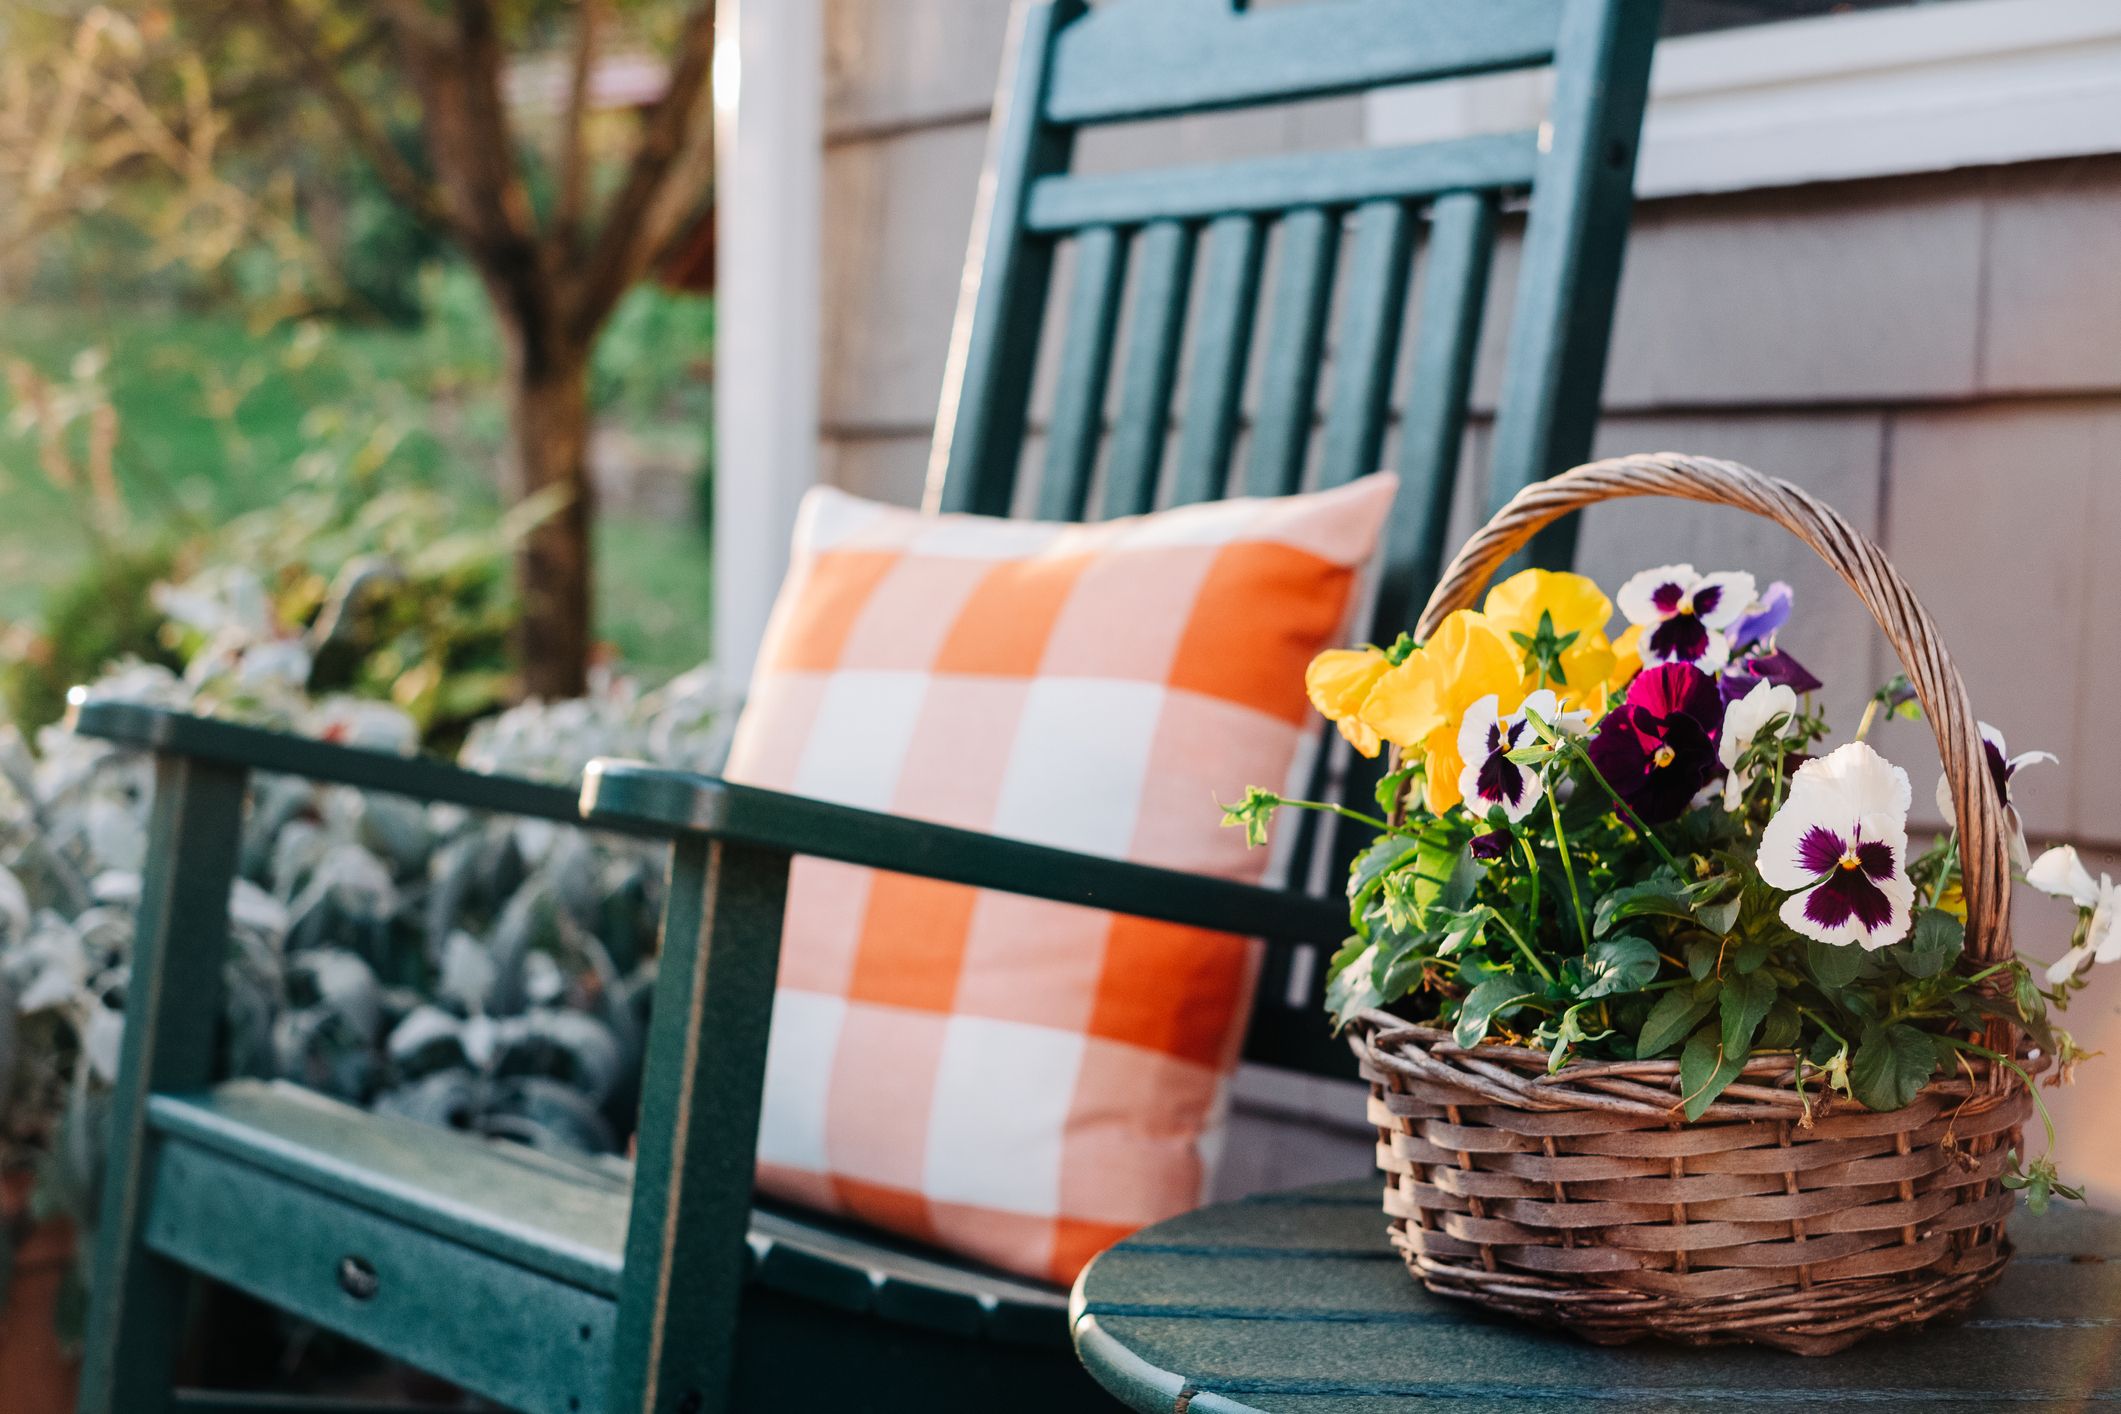 35 Front Porch Ideas - Decorating Ideas for the Front Porch